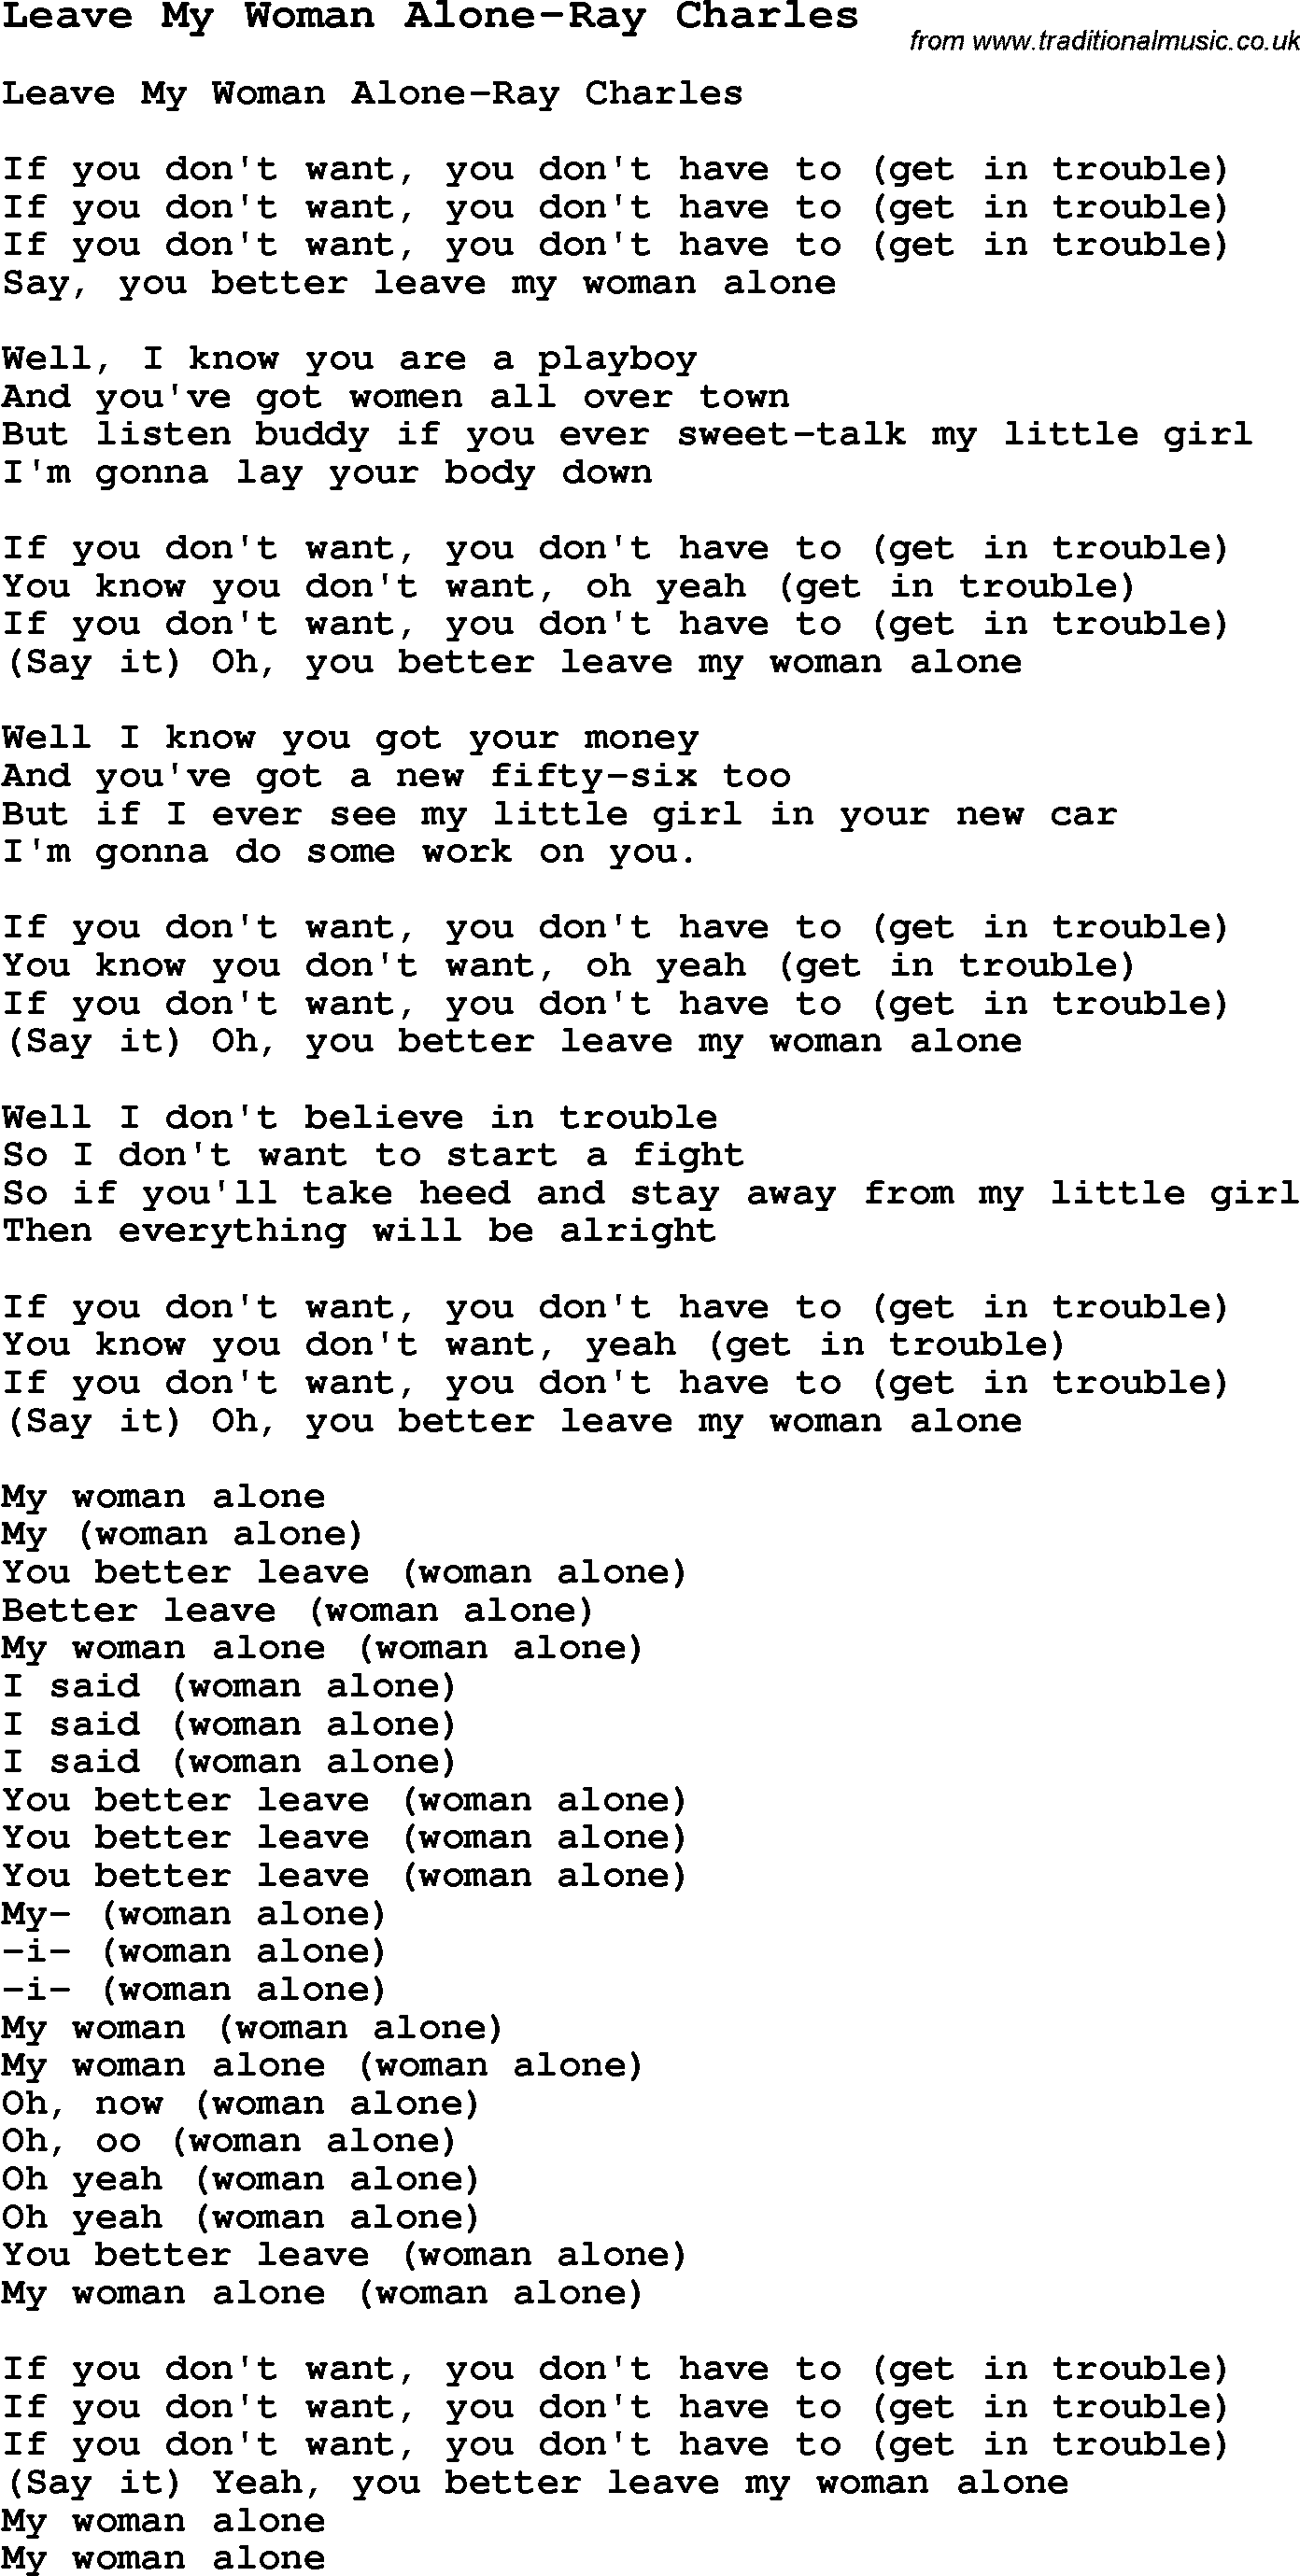 Skiffle Song Lyrics for Leave My Woman Alone-Ray Charles.